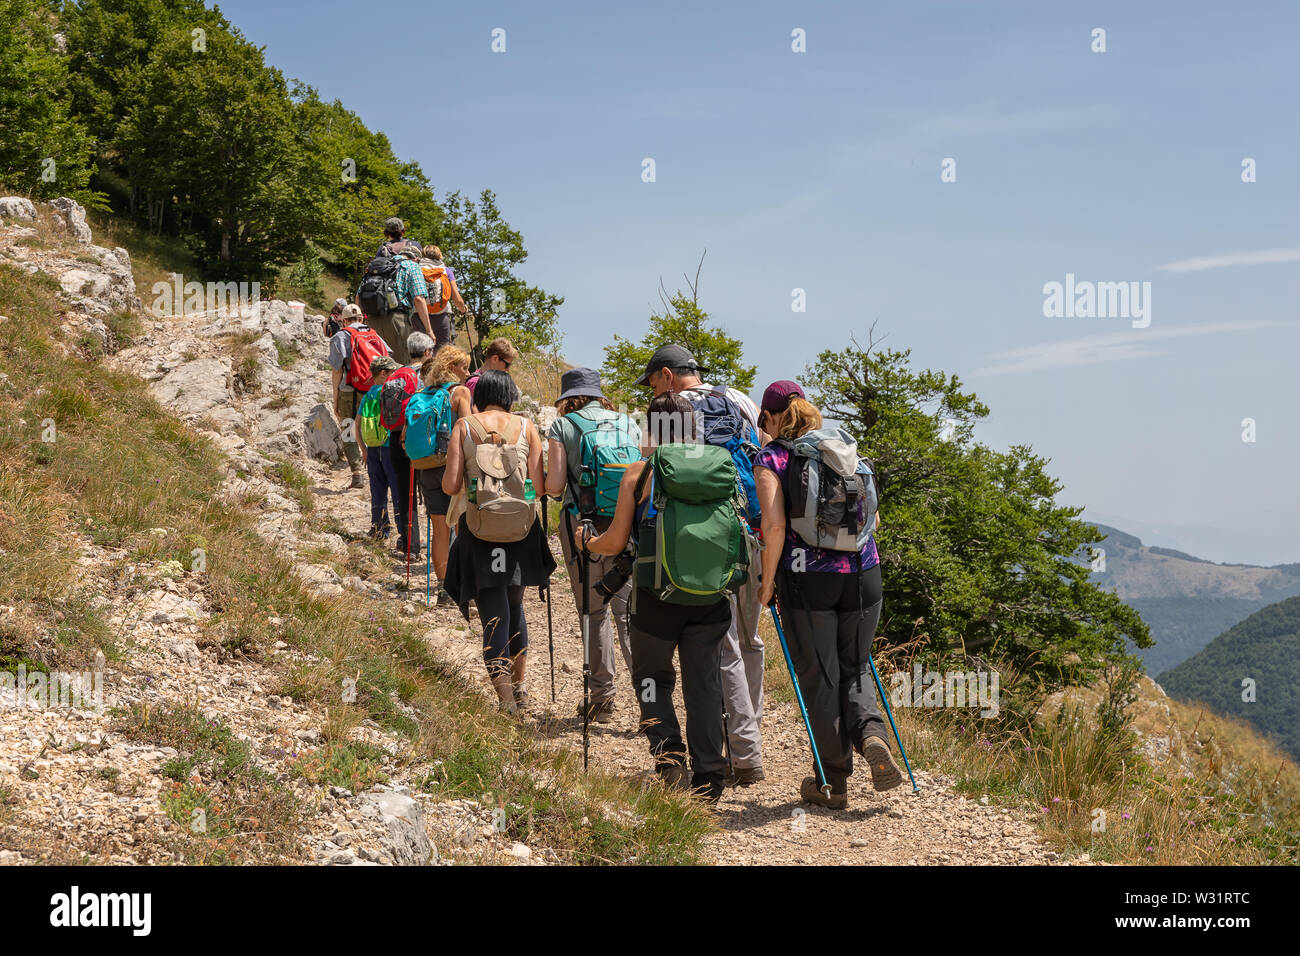 Subiaco RM, Italy - 07 July 2019: Group of hikers on the mountain path, go up the slope of Mount Autore. Stock Photo